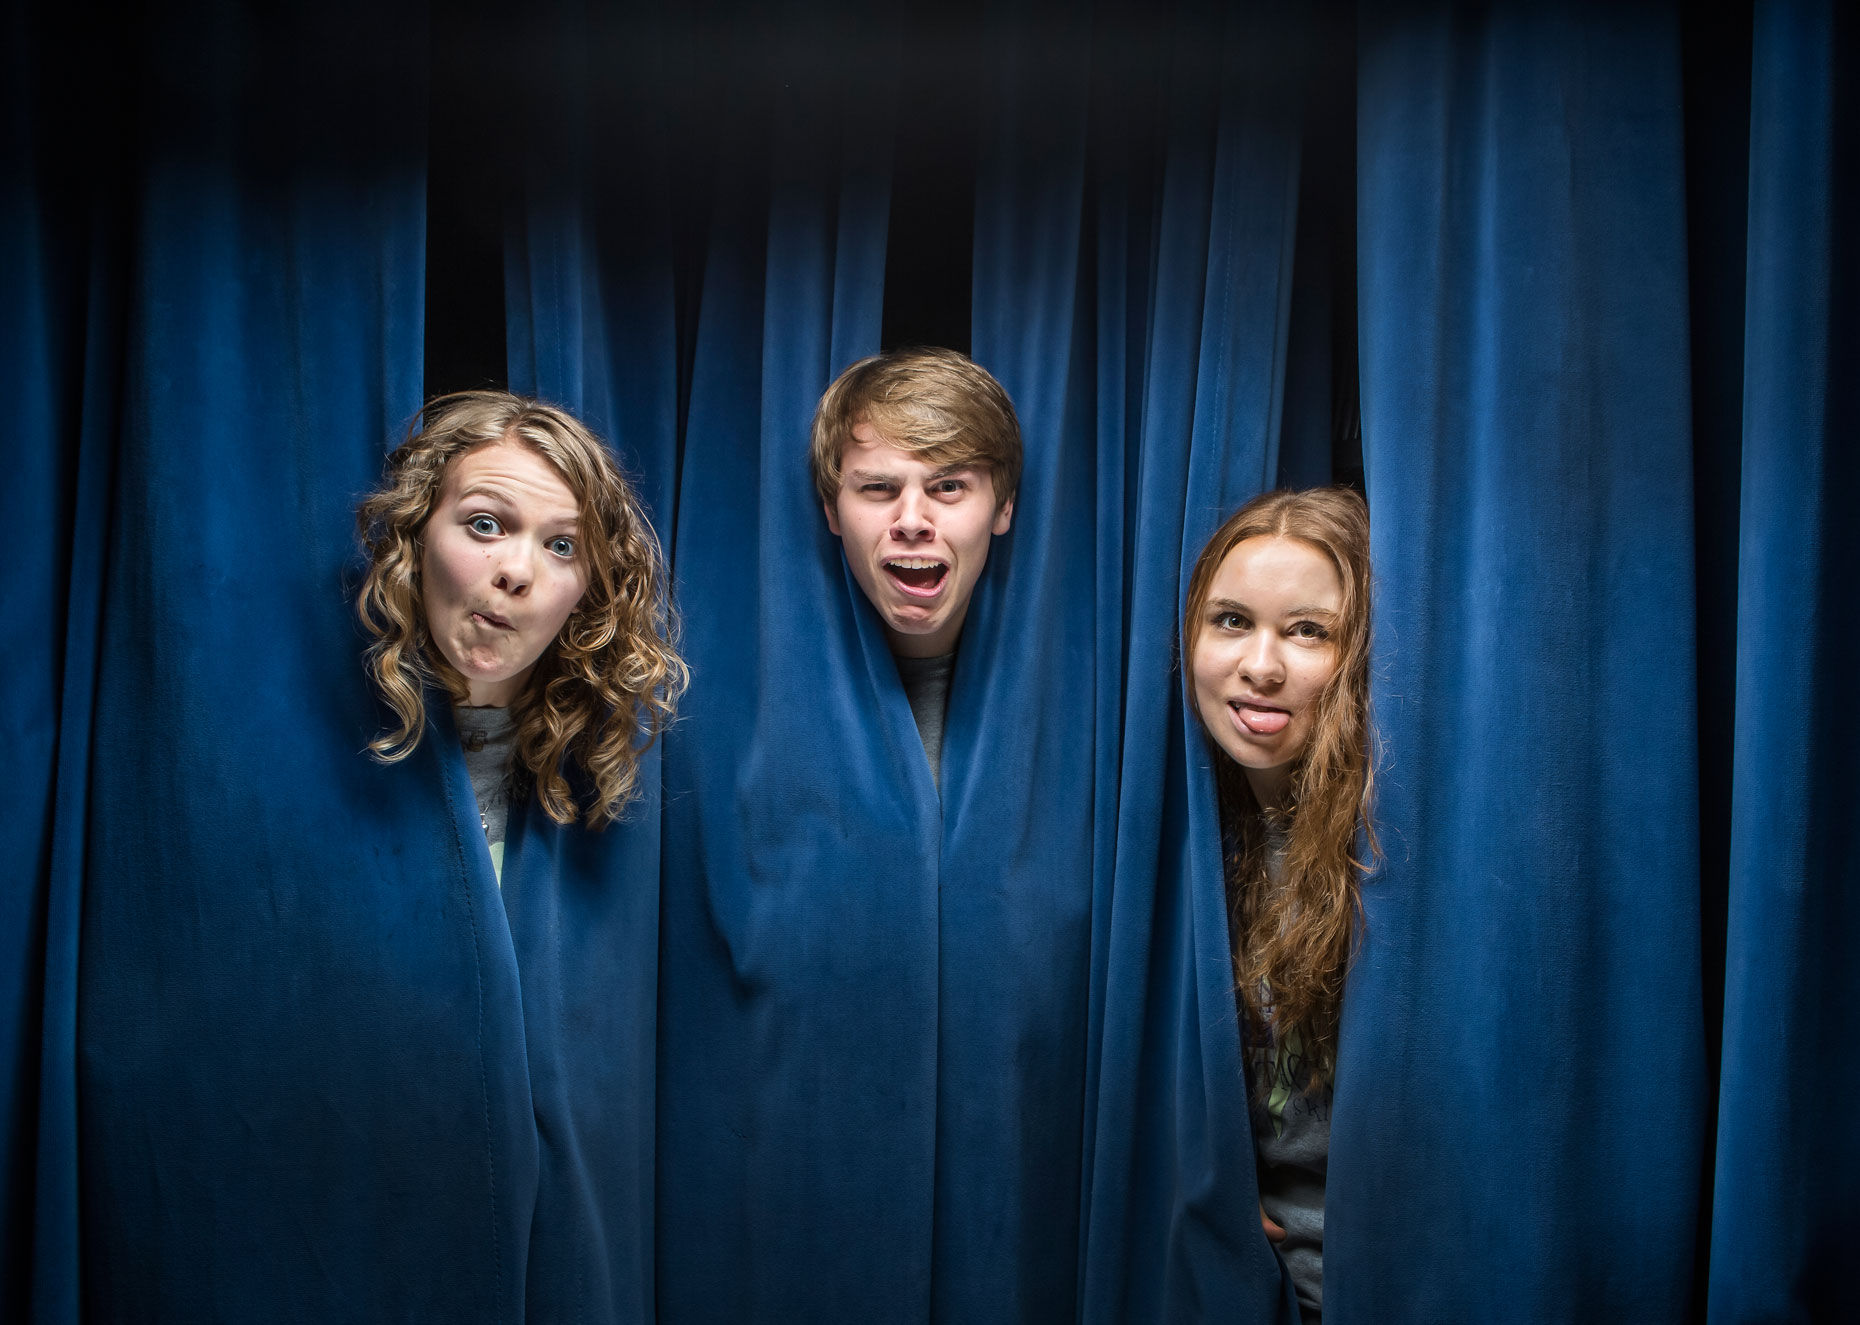 editorial photographer Milwaukee - young actors make silly faces through a blue stage curtain